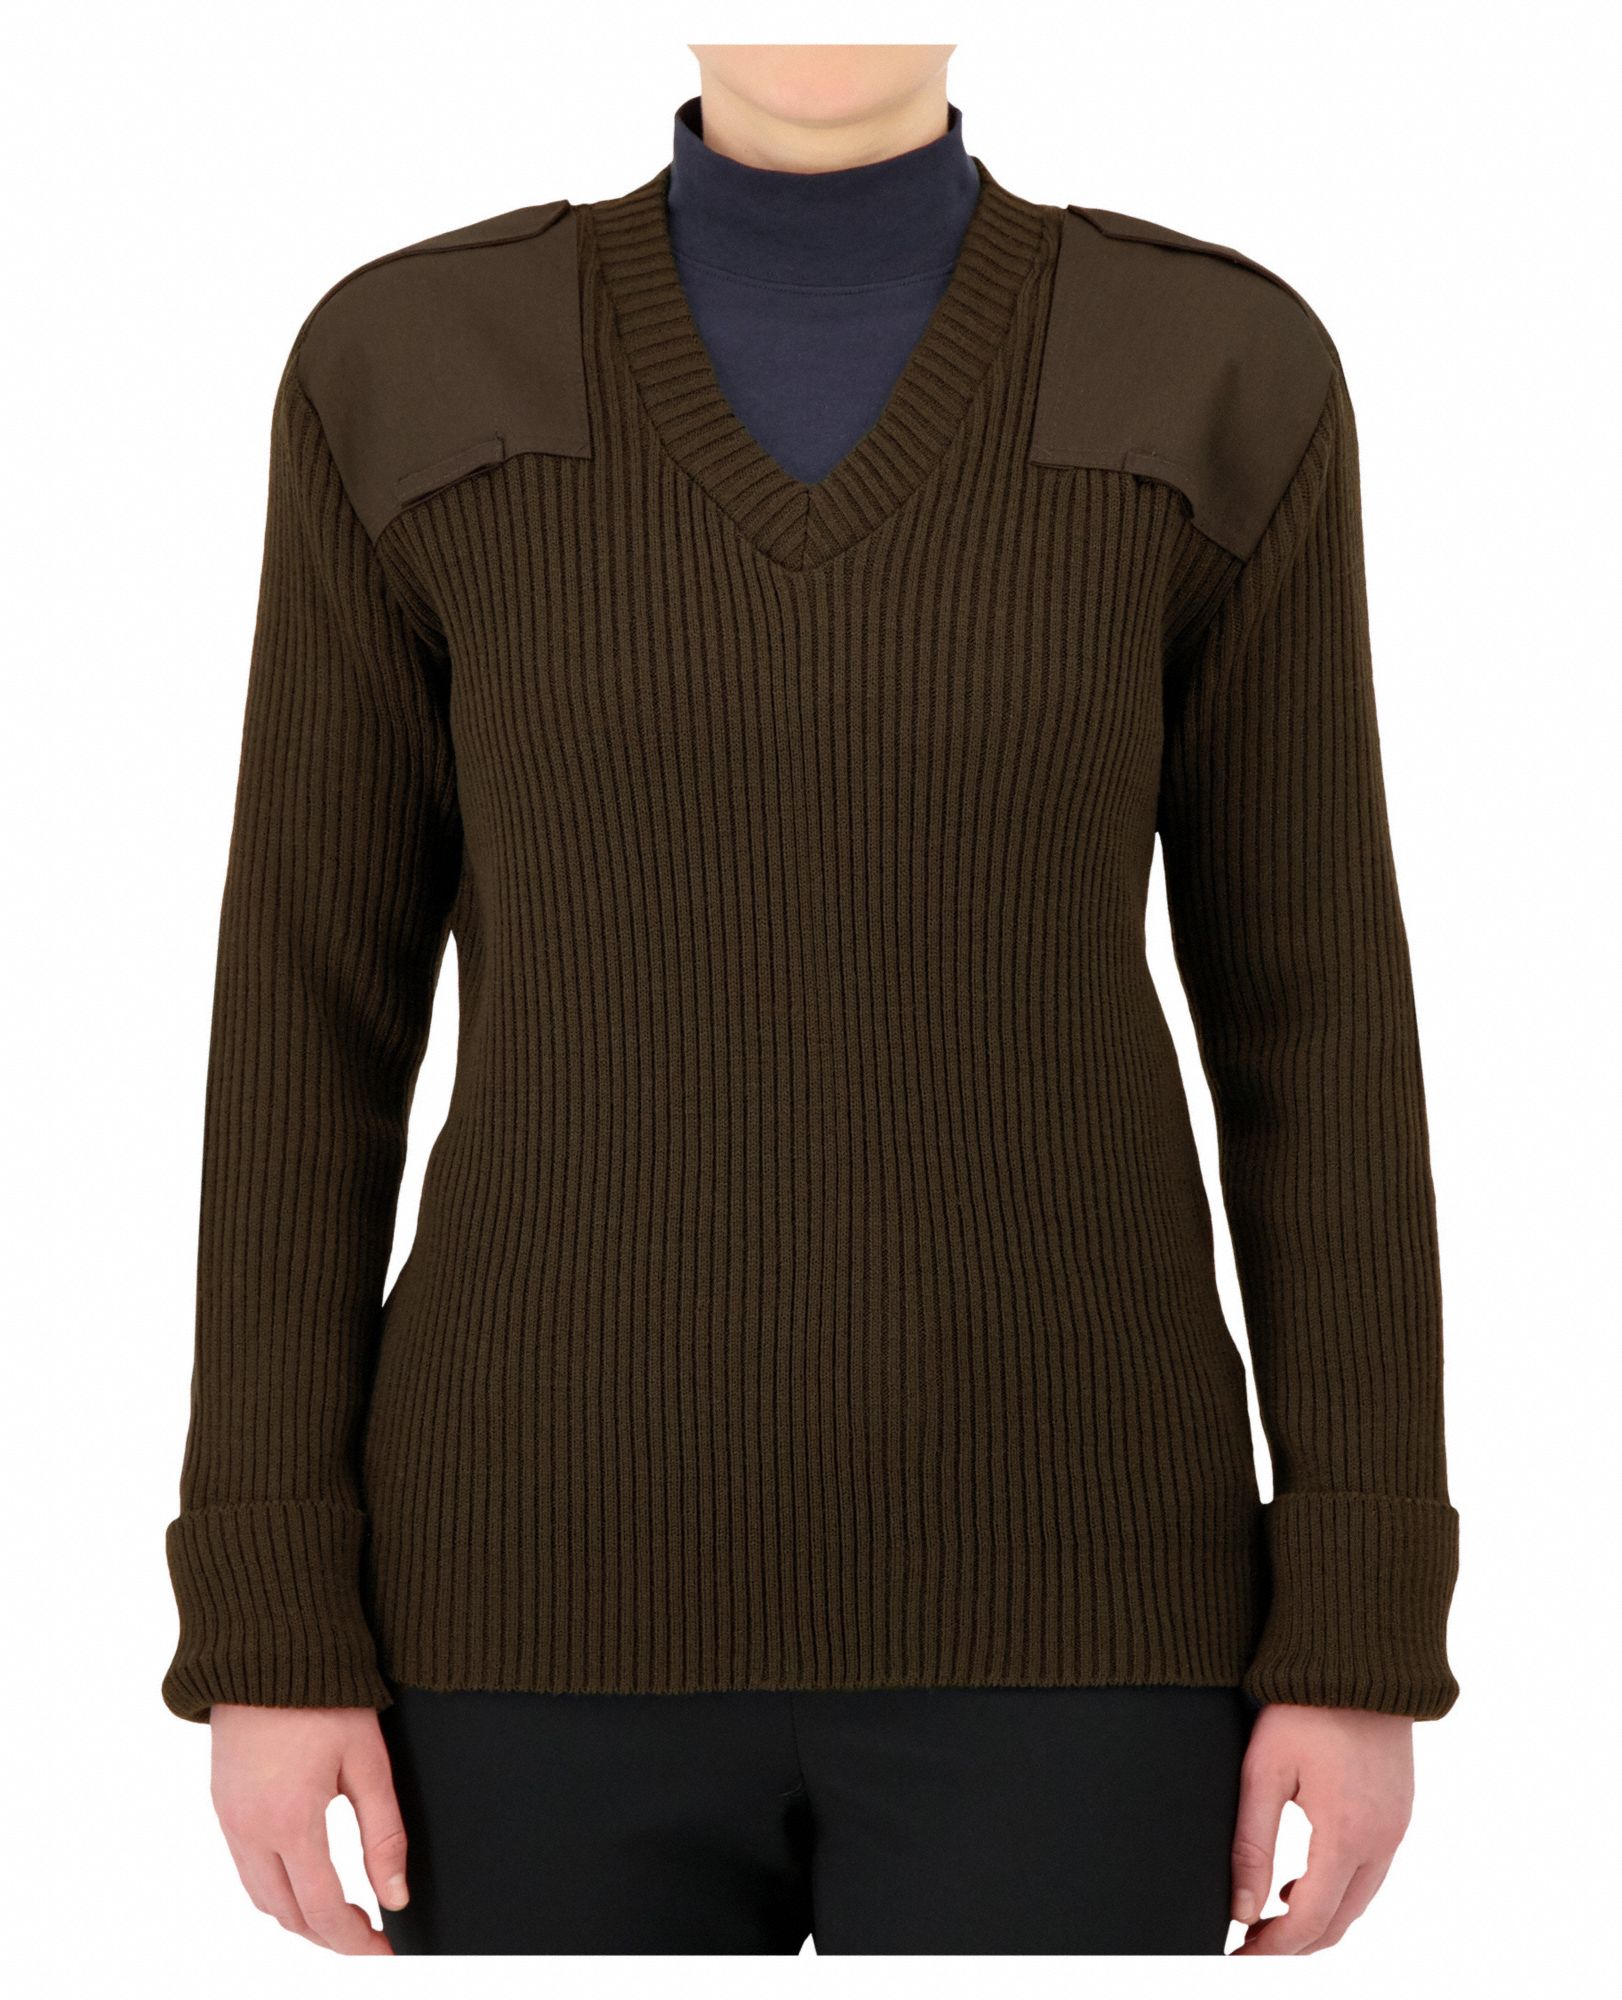 V-Neck Military Sweater: XS, 38 in Fits Chest Size, Brown, 100% Acrylic Material